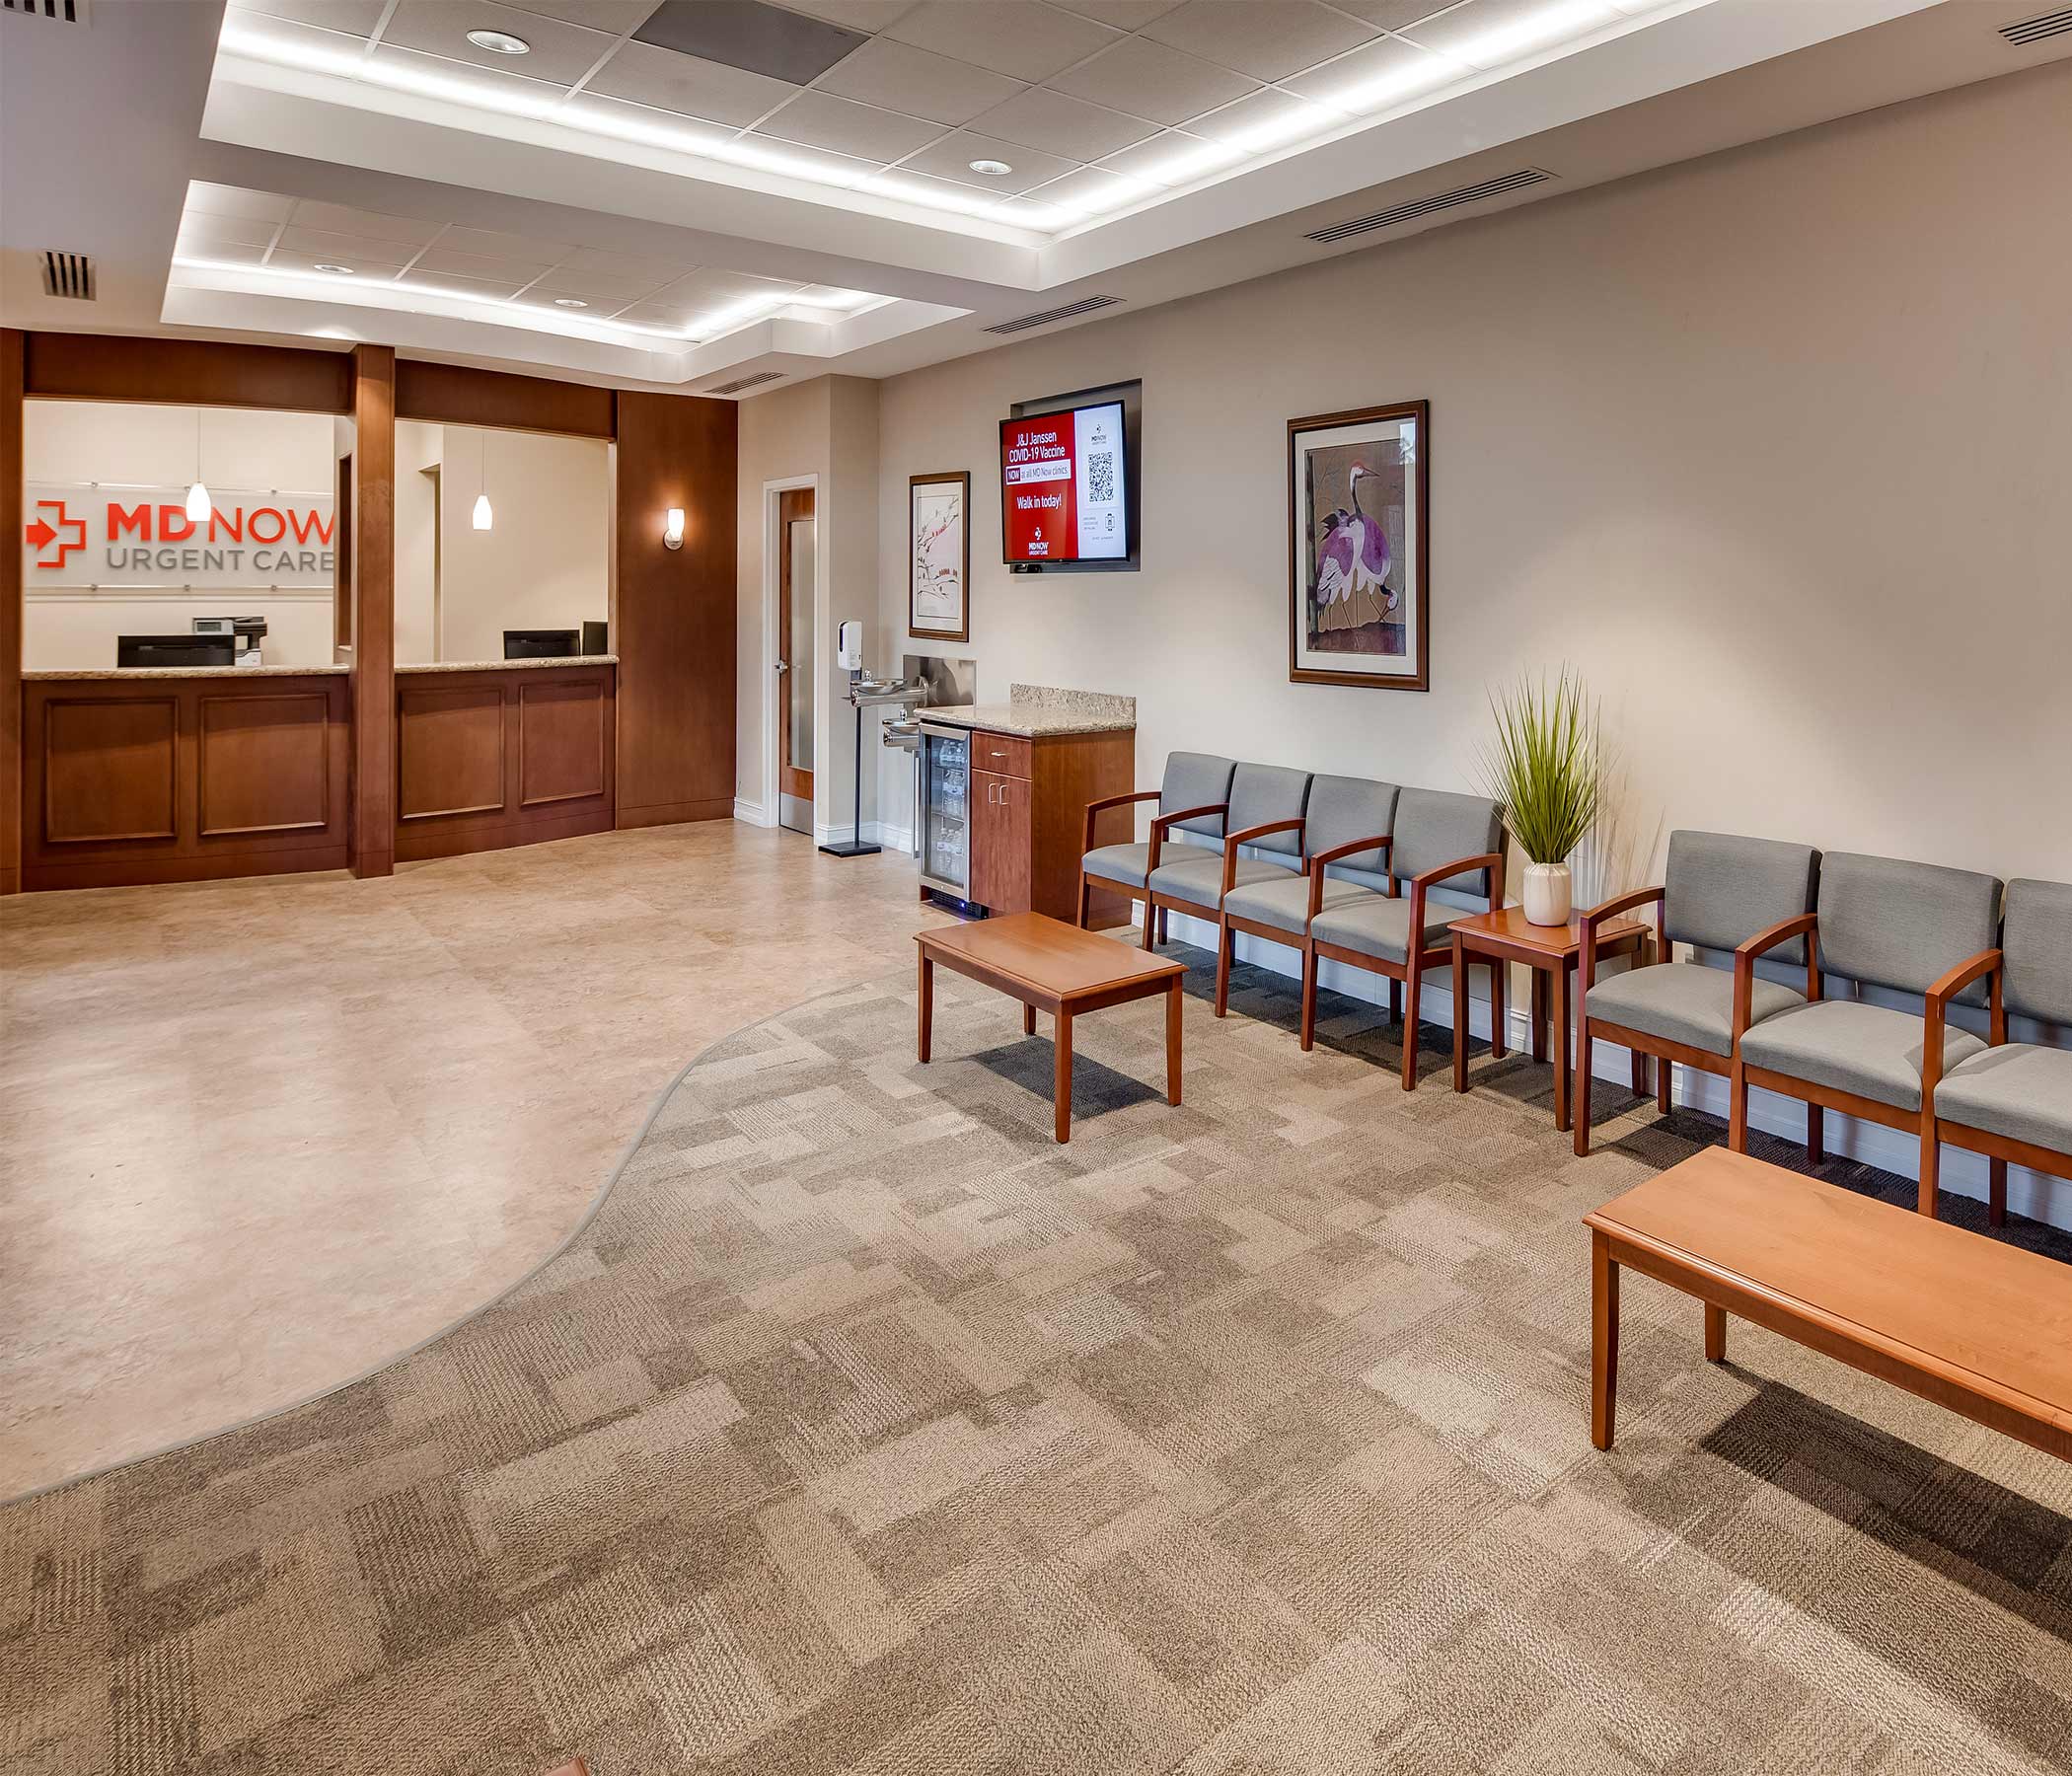 MD Now Urgent Care, No Appt. Necessary, walk-ins welcome.